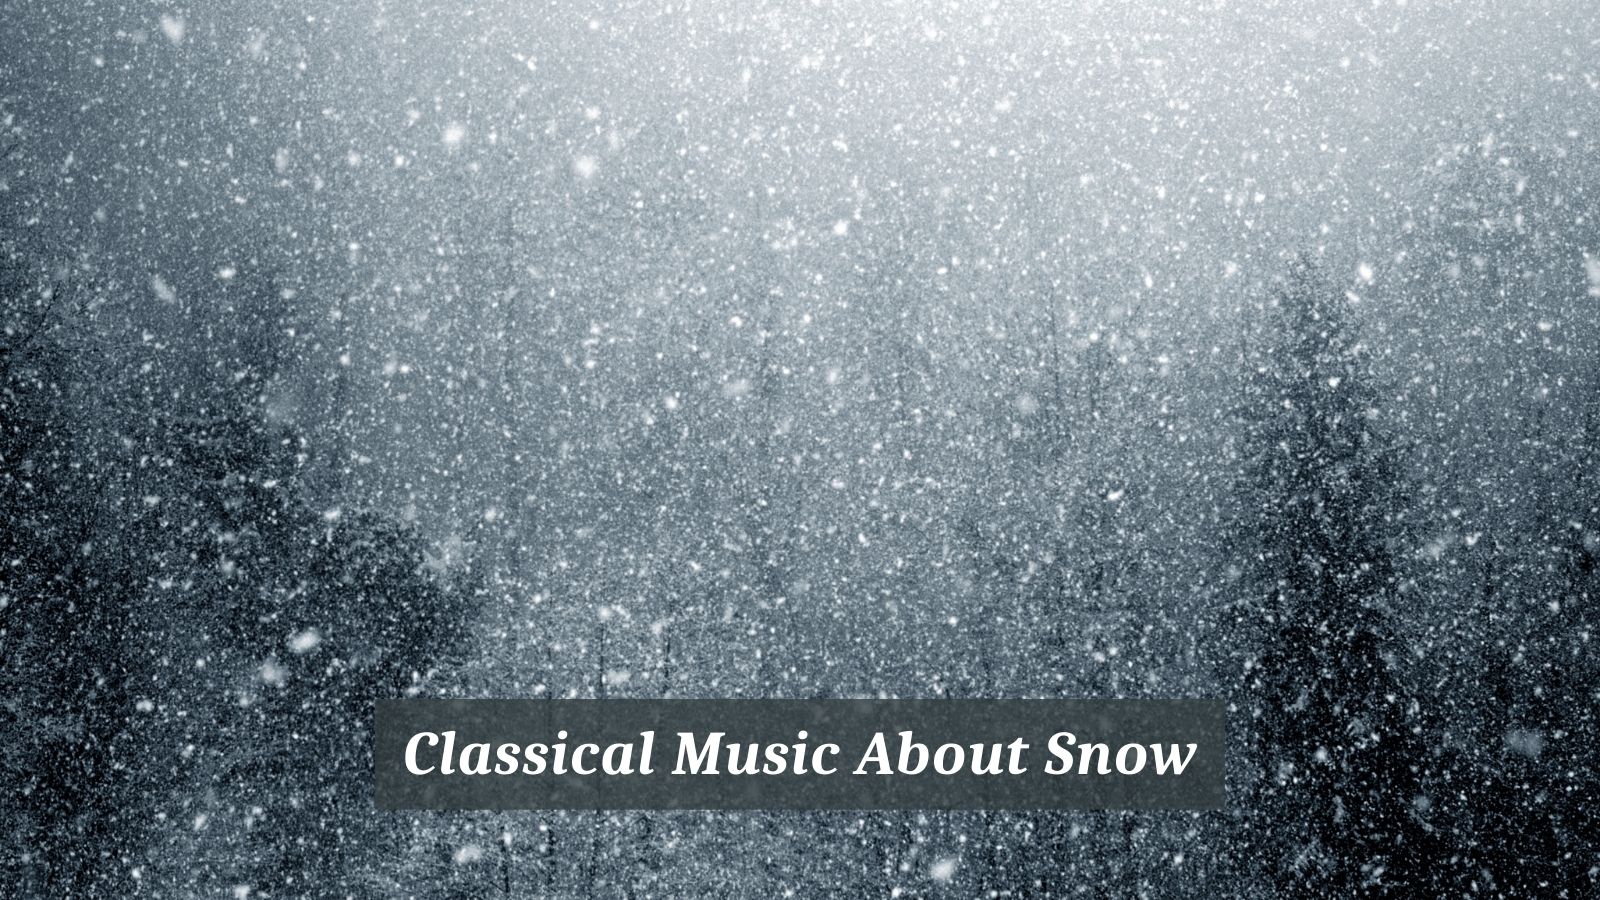 Classical Music About Snow